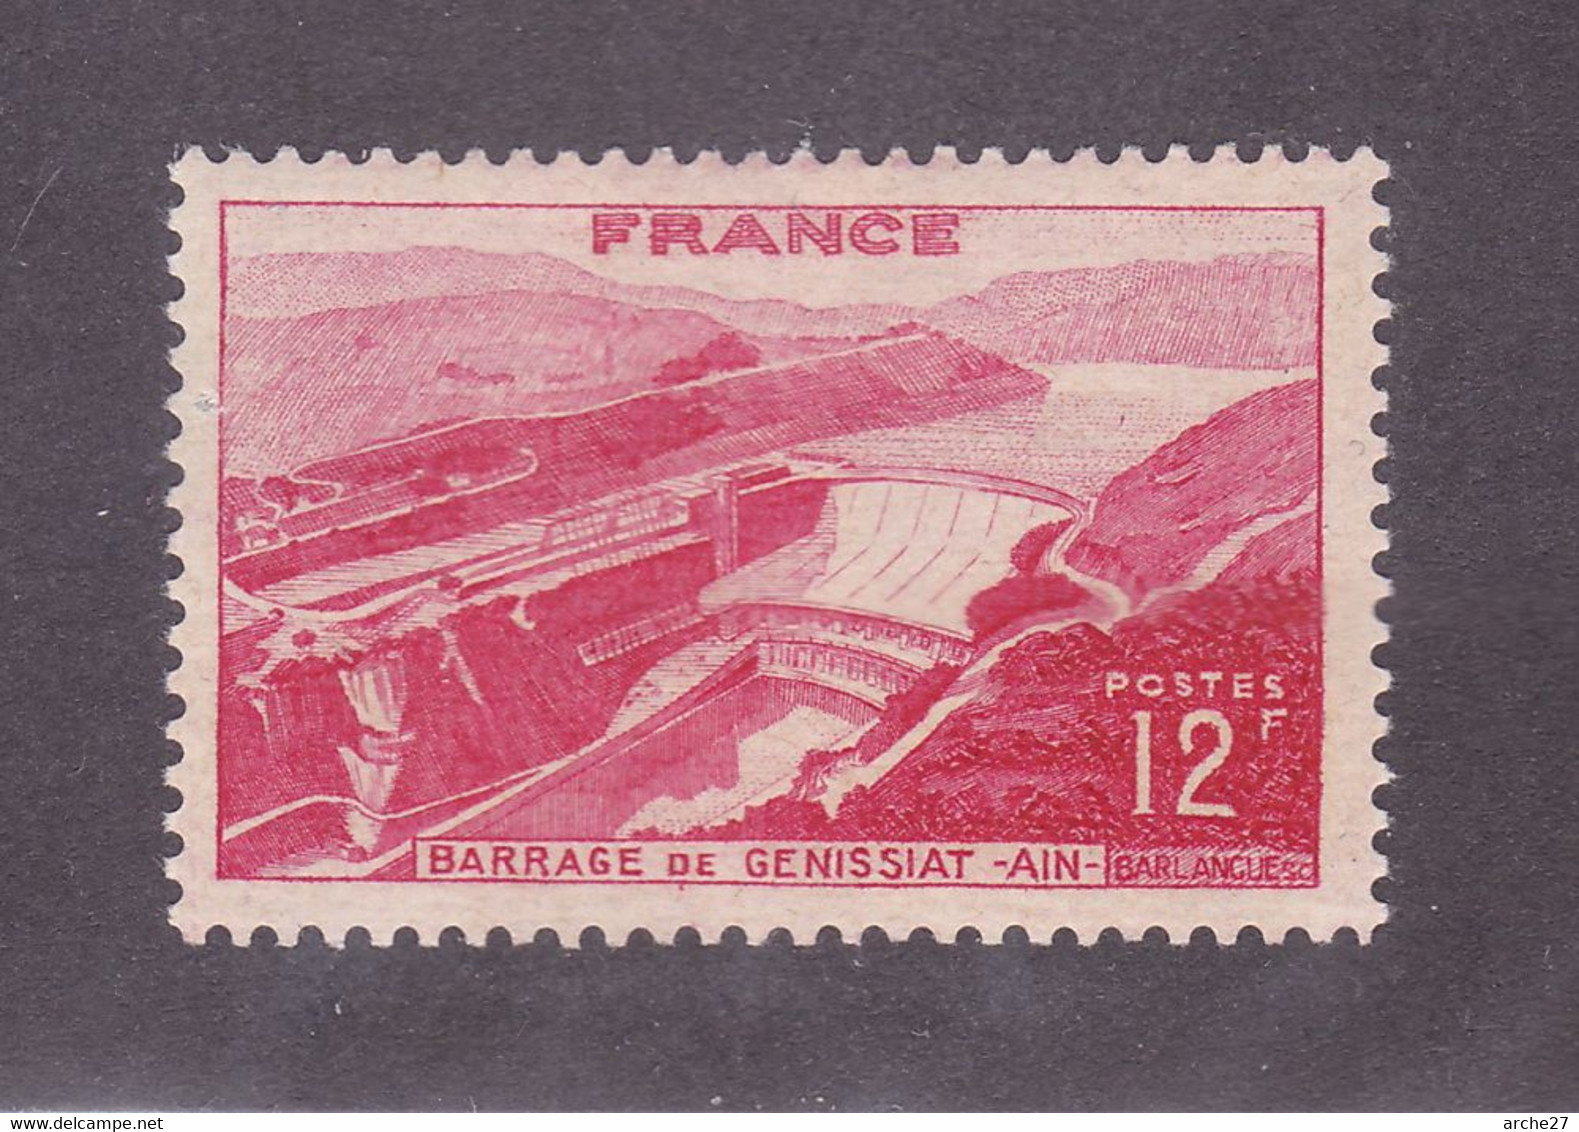 TIMBRE FRANCE N° 817 NEUF ** - Nuovi